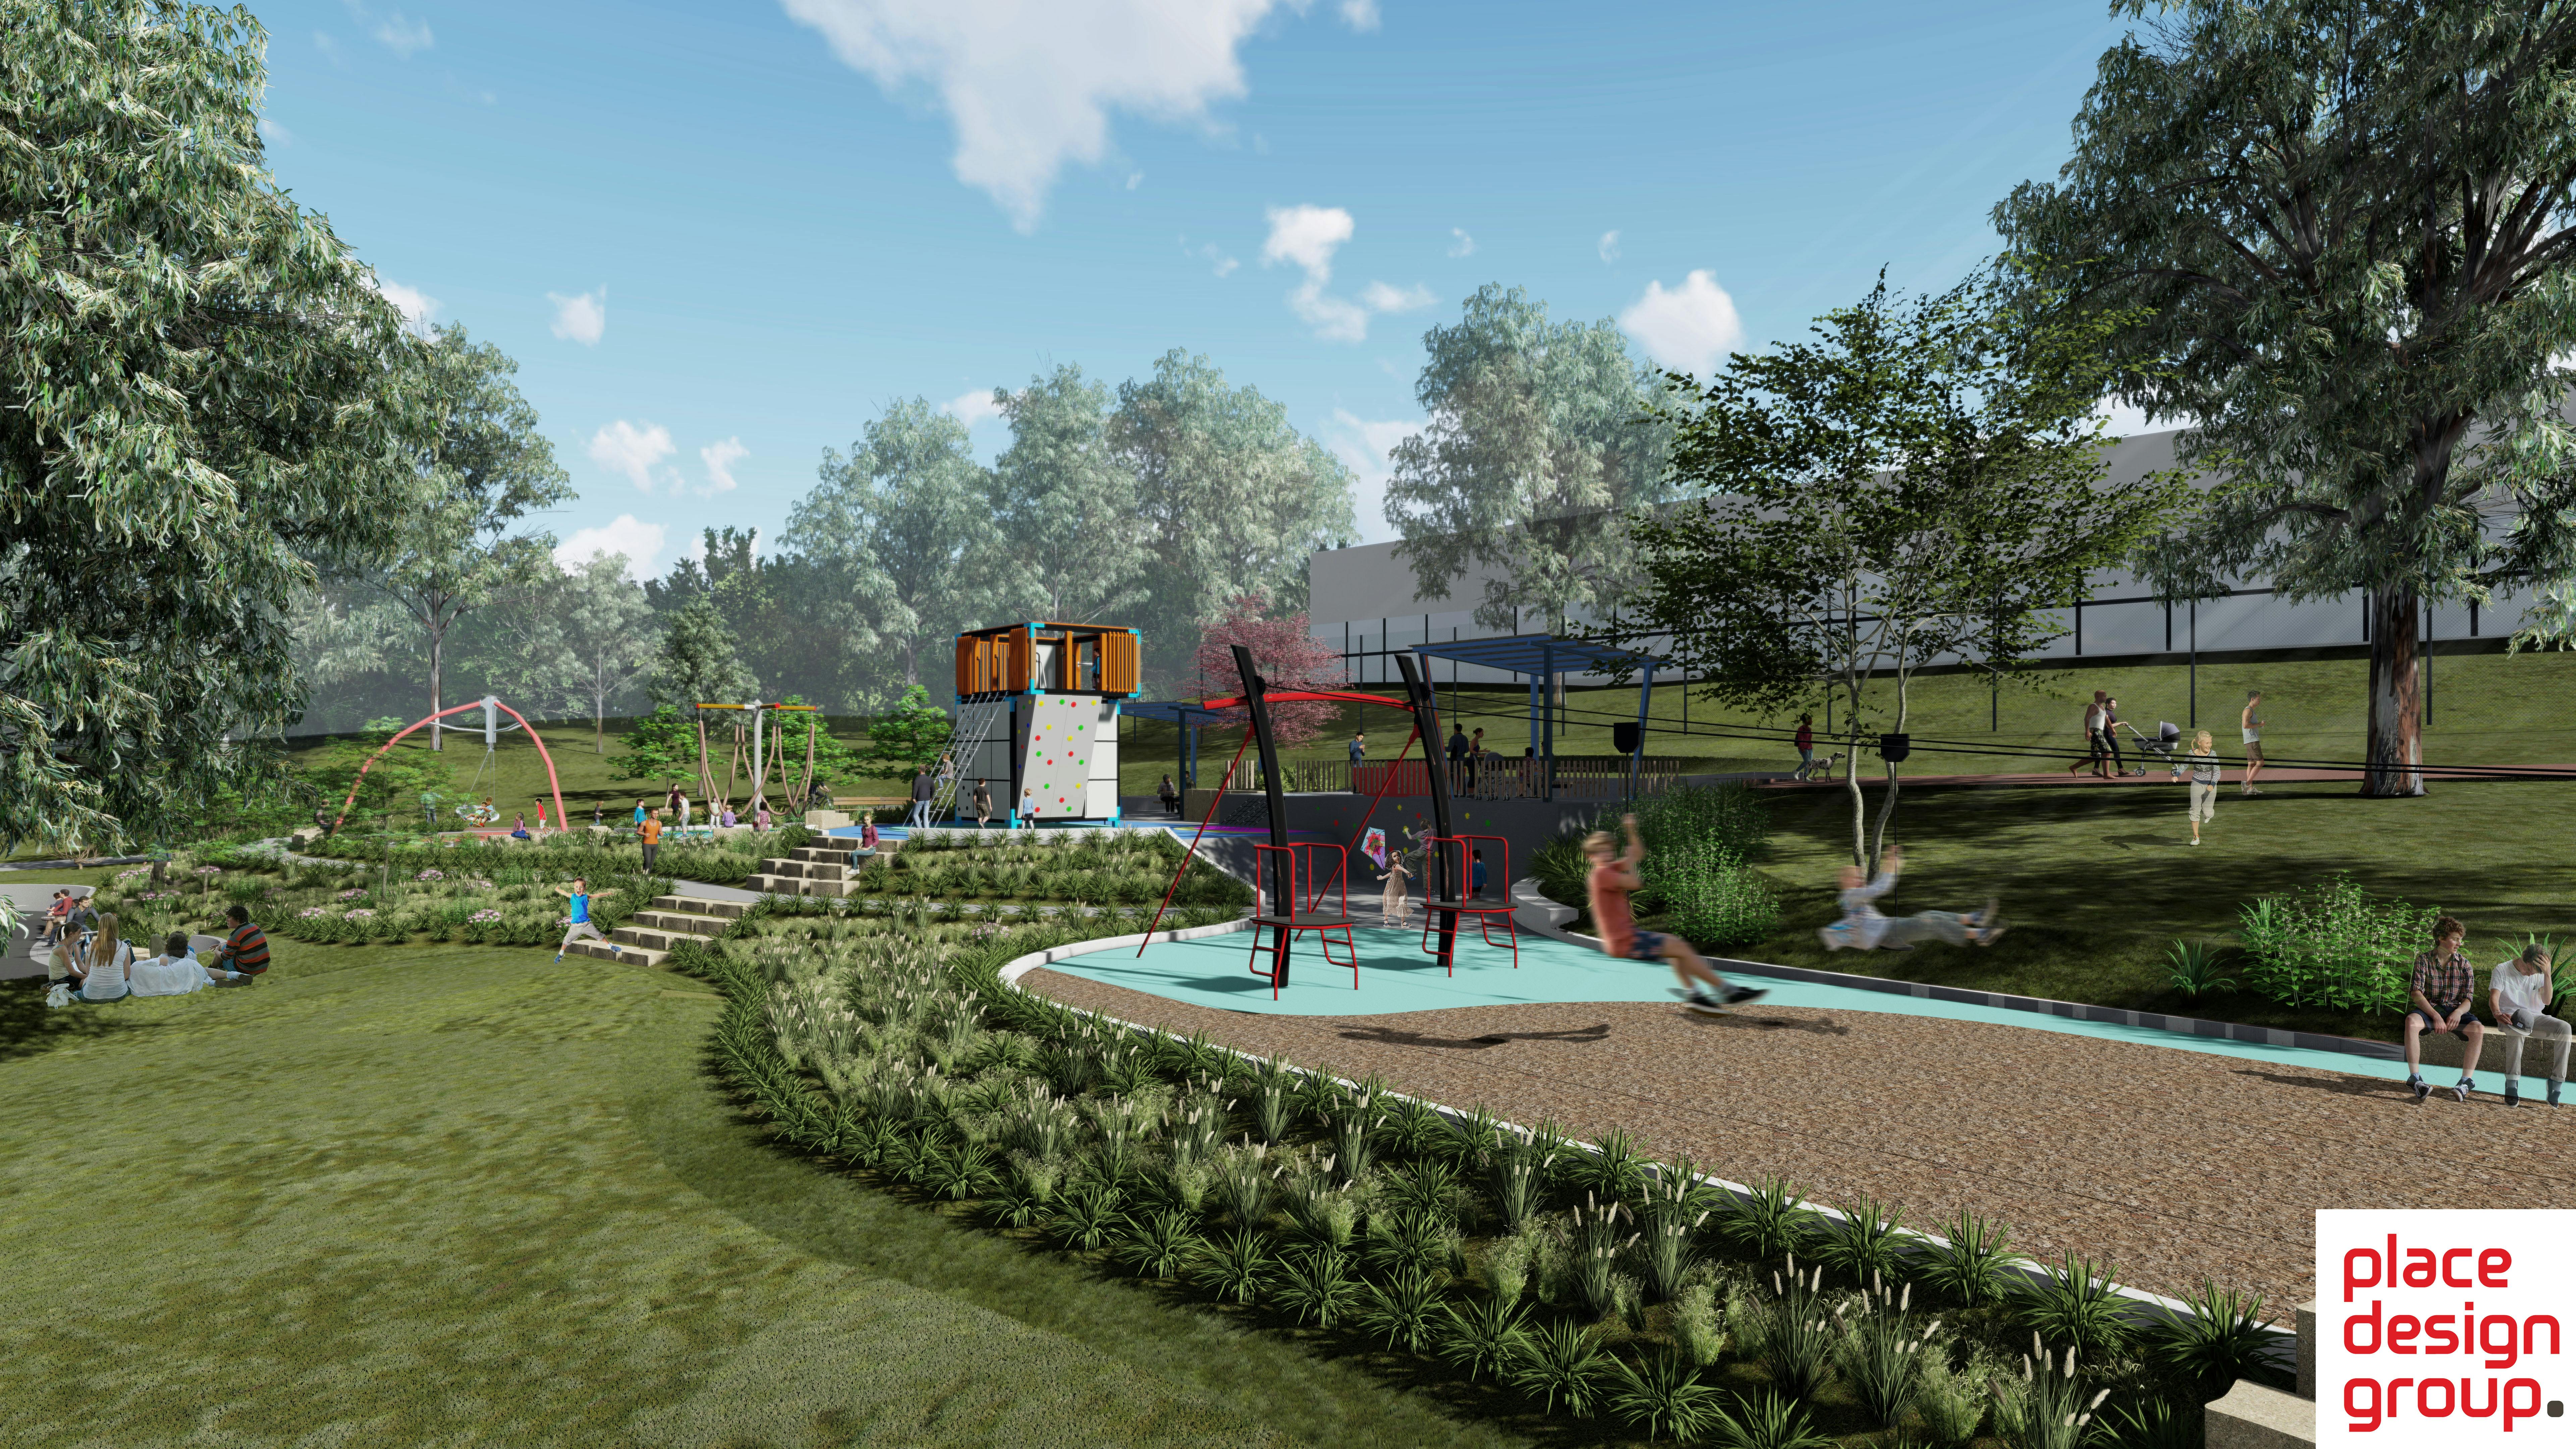 Proposed new play space at Buttenshaw Park, Springwood, featuring a double flying fox, group swing, and climbing structure. 